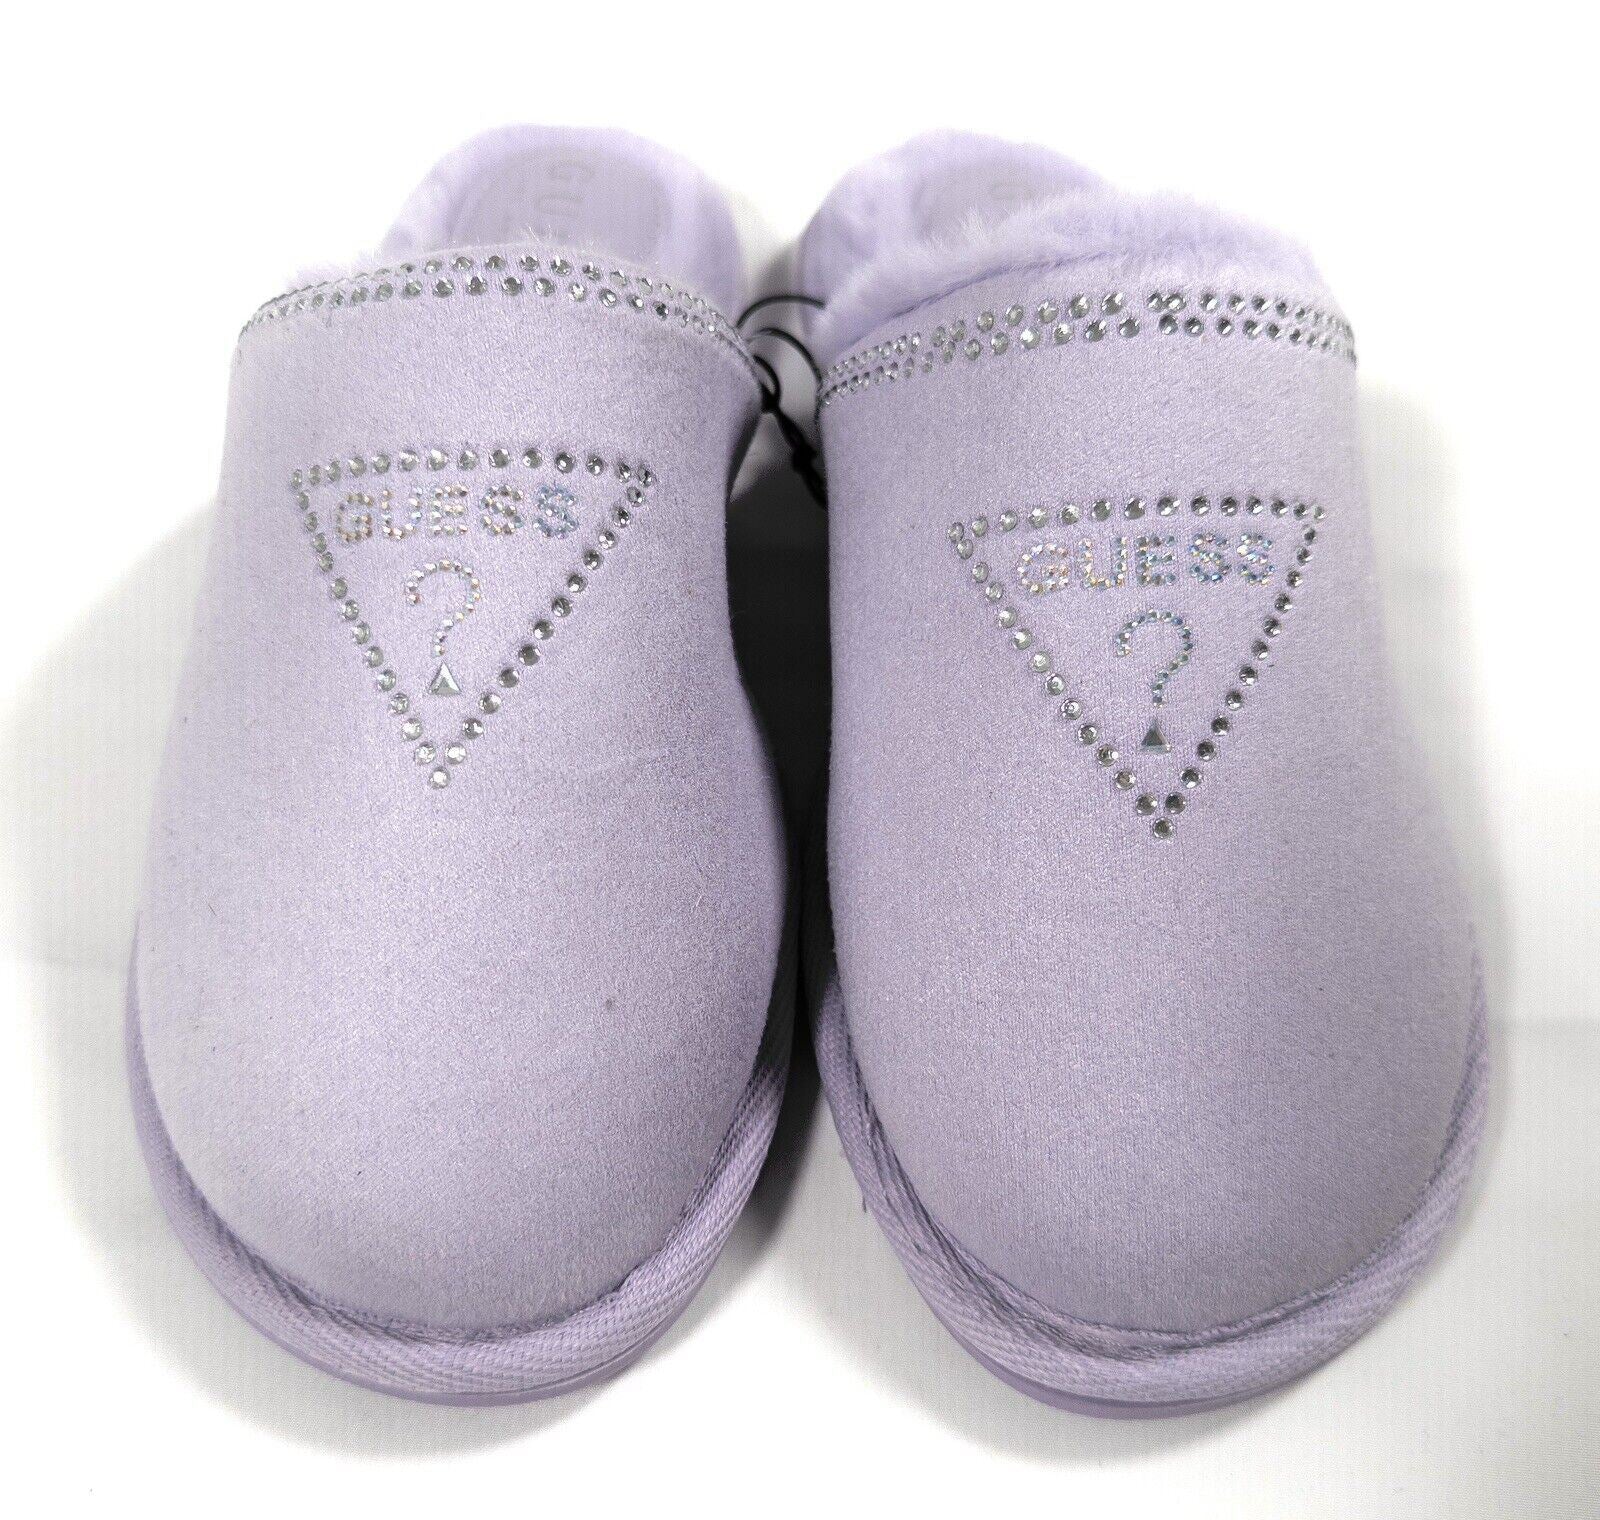 GUESS Women's Lilac Slip on Slippers Fluffy Size UK 5